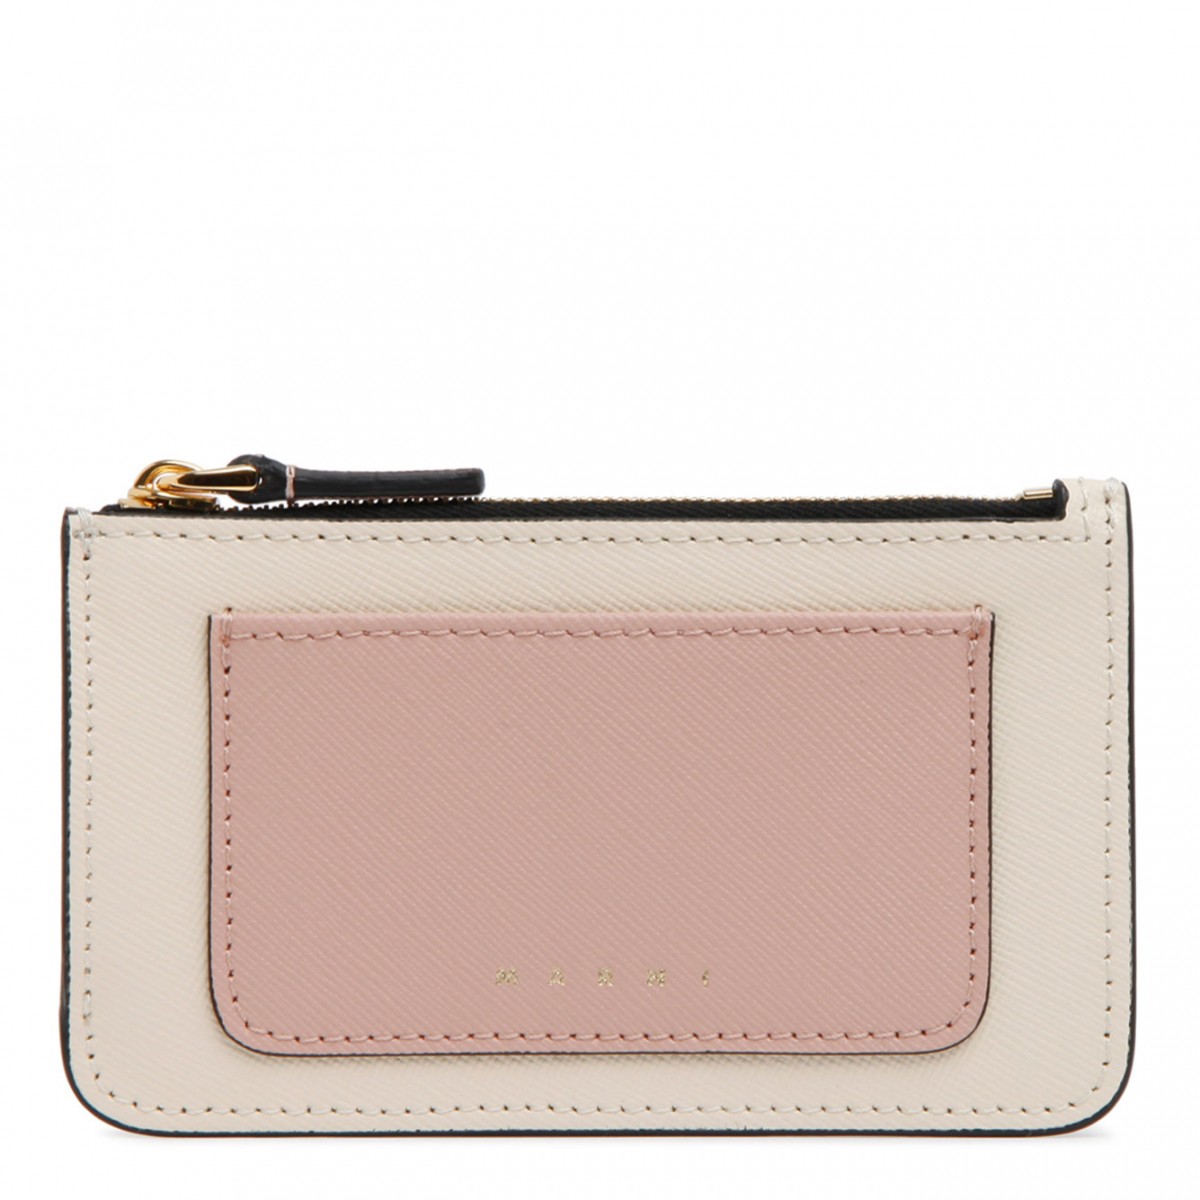 Cream White, Beige and Light Pink Calf Leather Tonal Cardholder